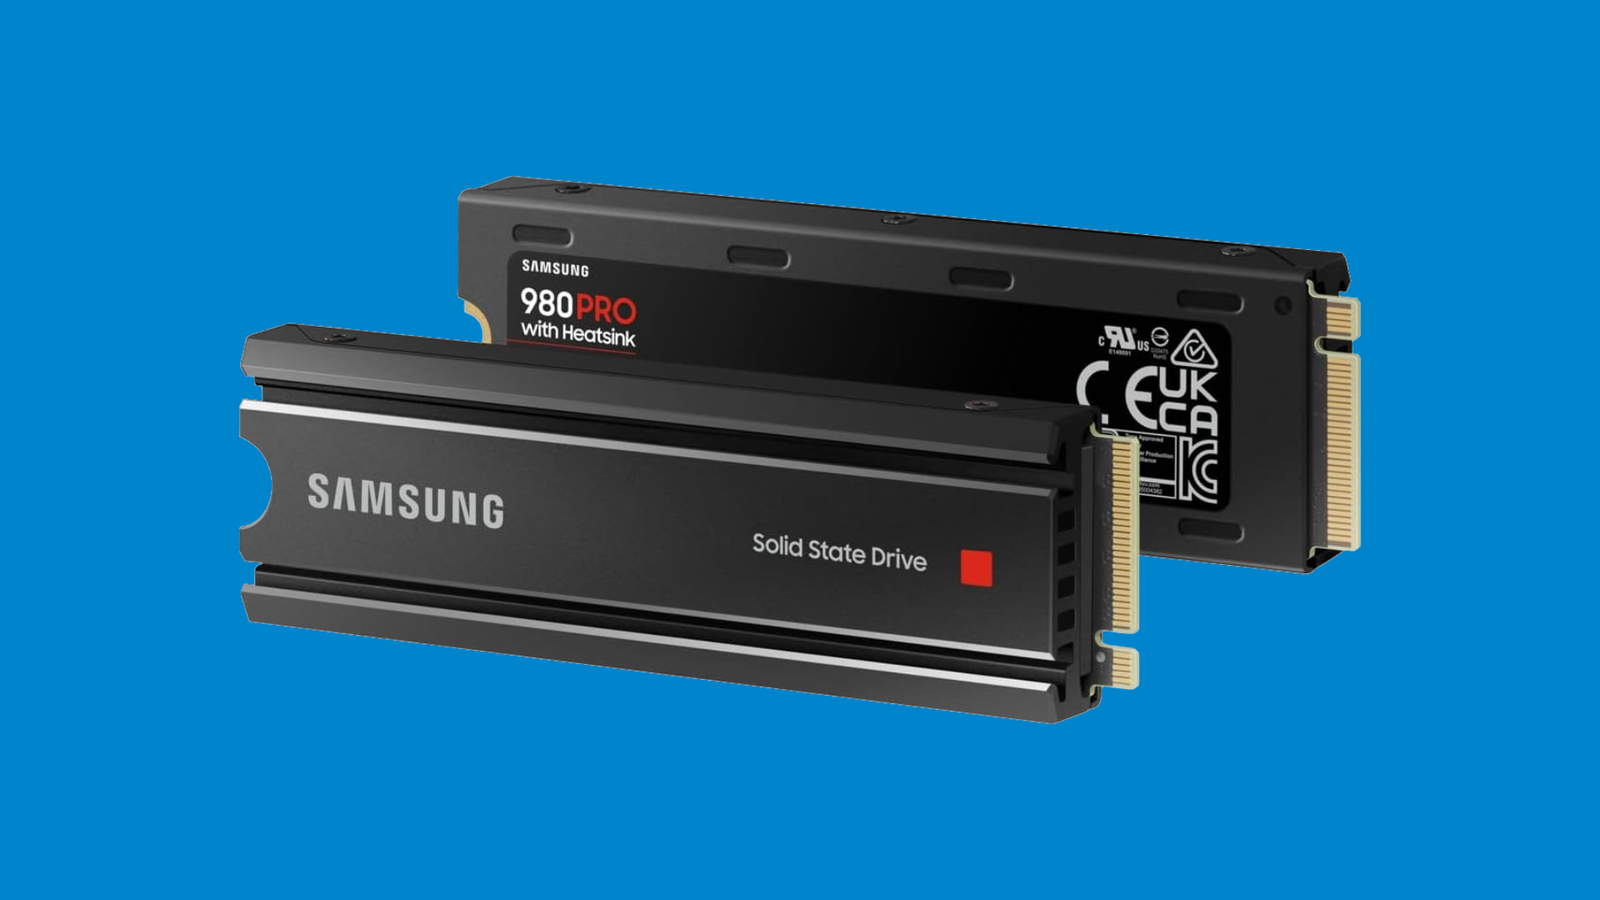 Take home Samsung's 980 Pro 1TB Heatsink SSD for £73 thanks to an  code